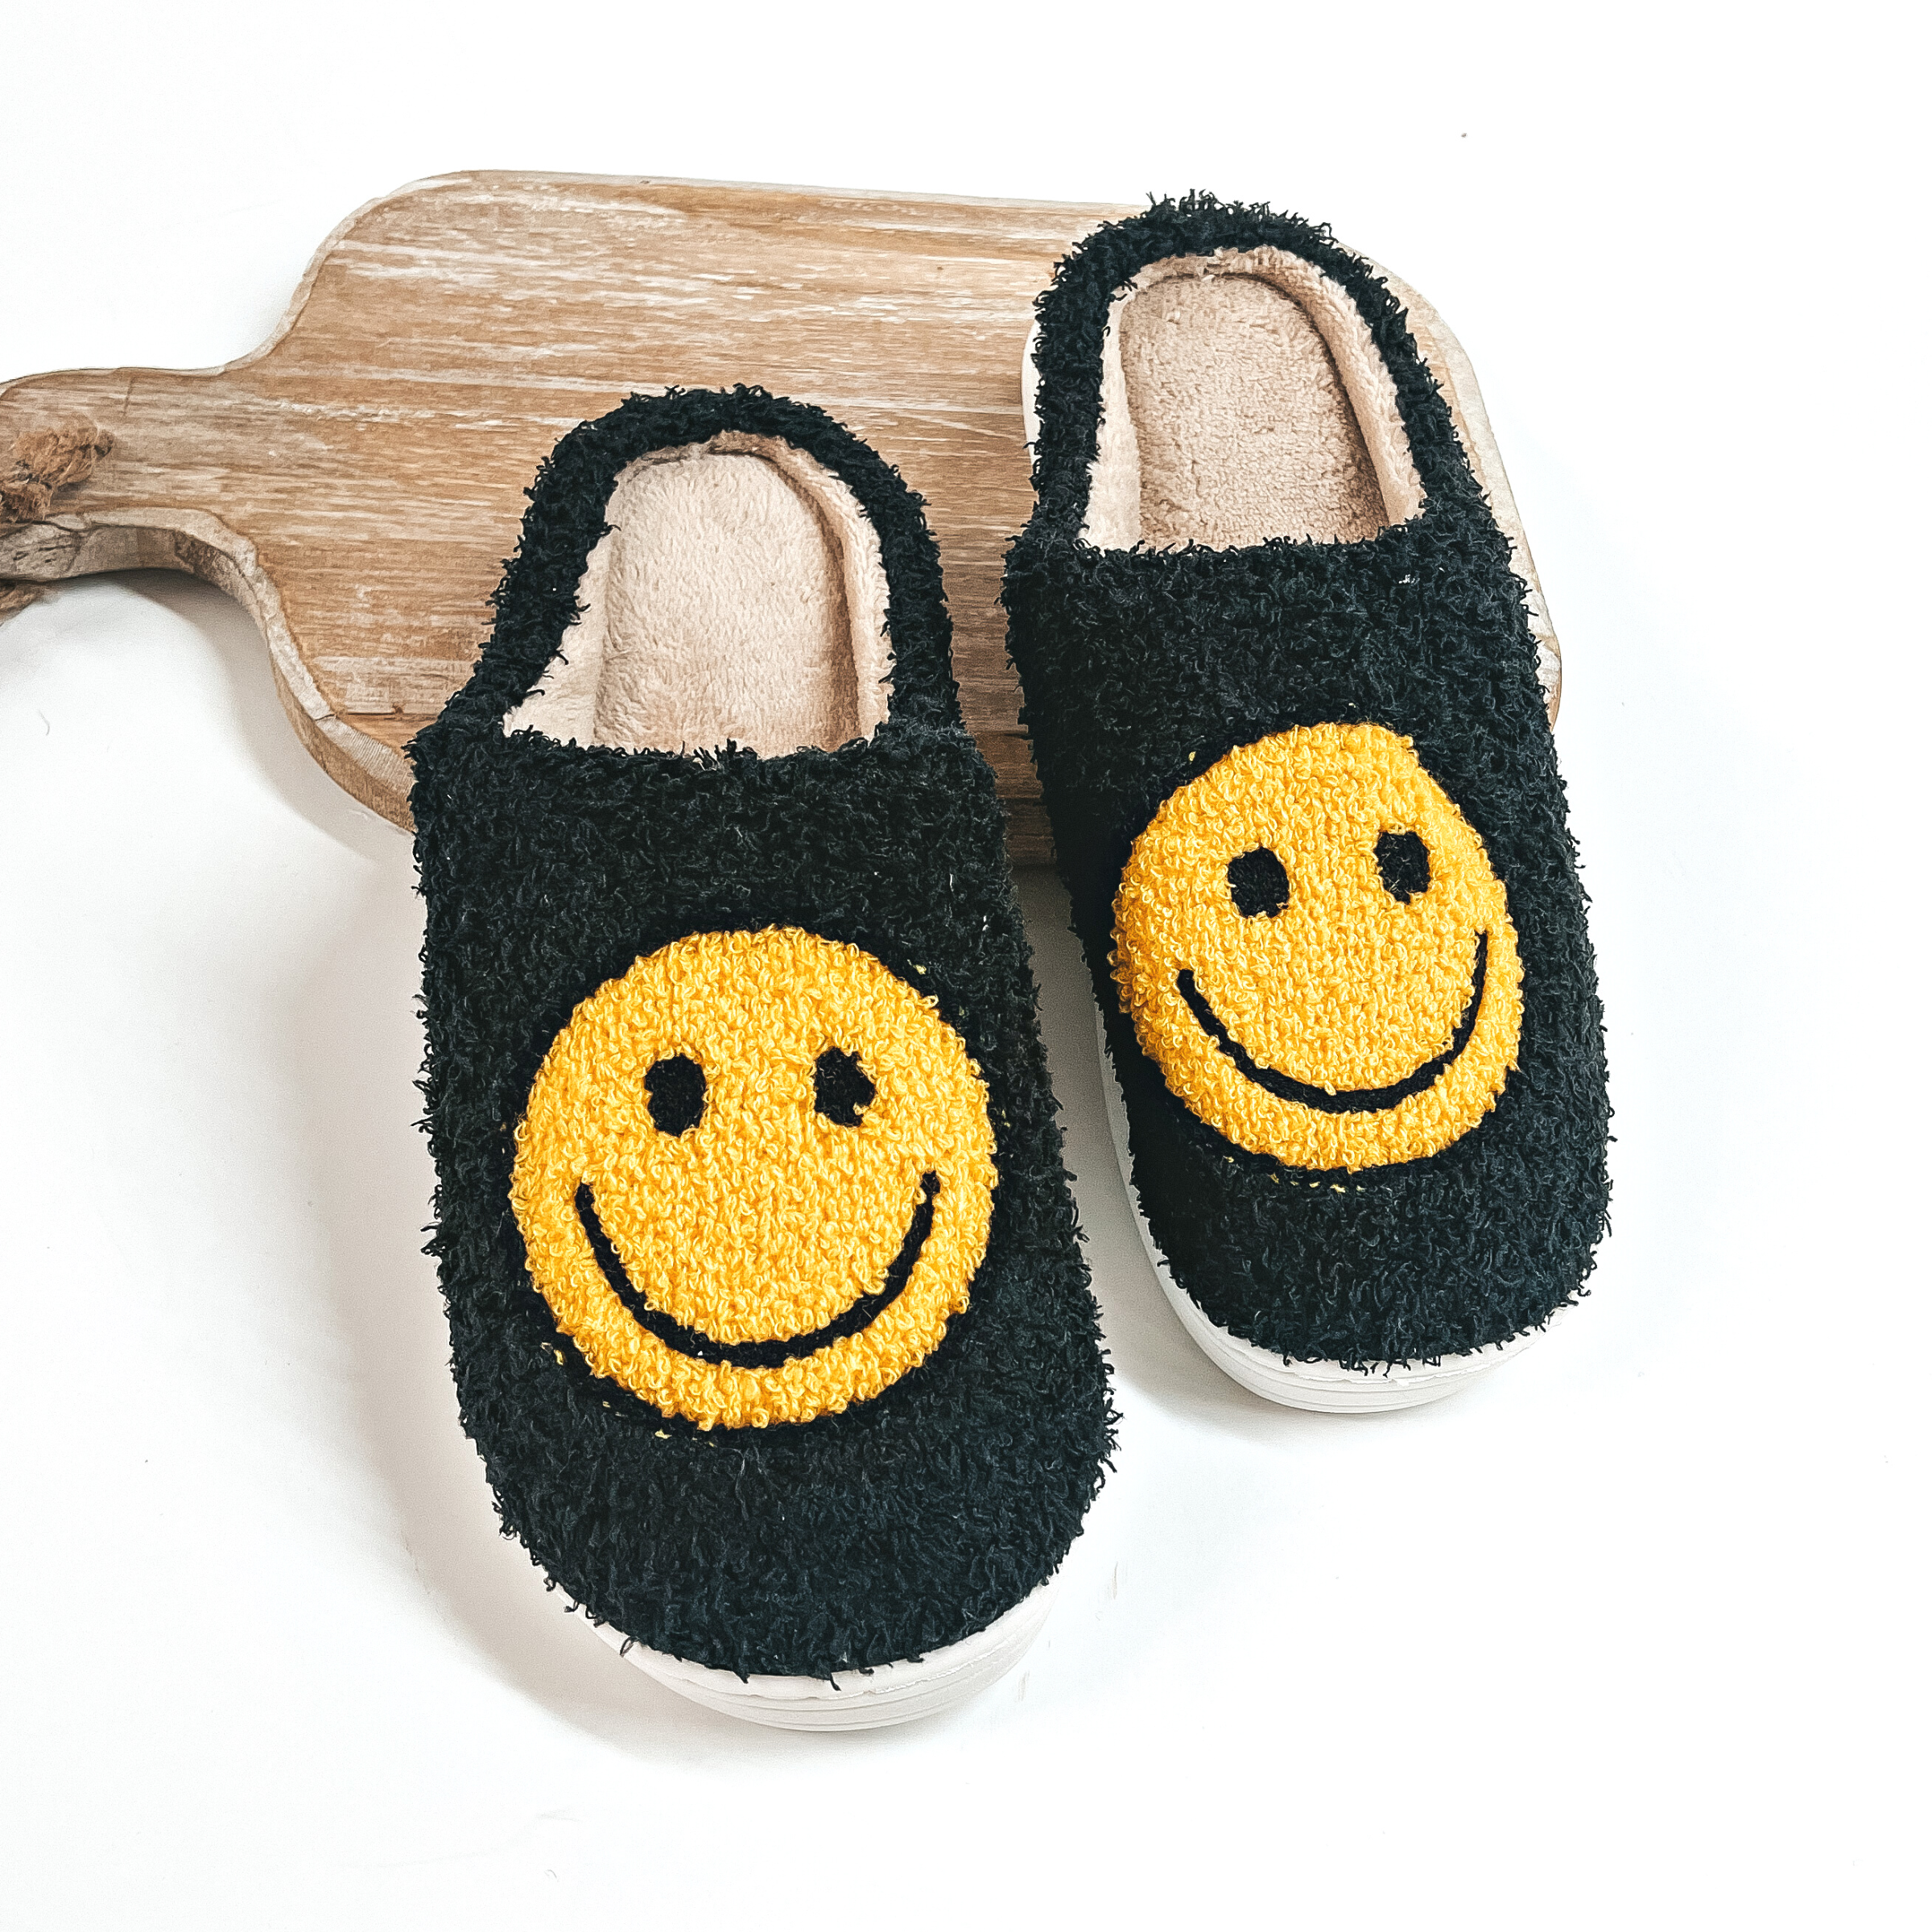 There are sherpa slippers in black with yellow happy faces on top of each  slipper. The inside is in brown and the bottom sole is white. The pair  of slippers are placed on a wooden slab and on a white backround.